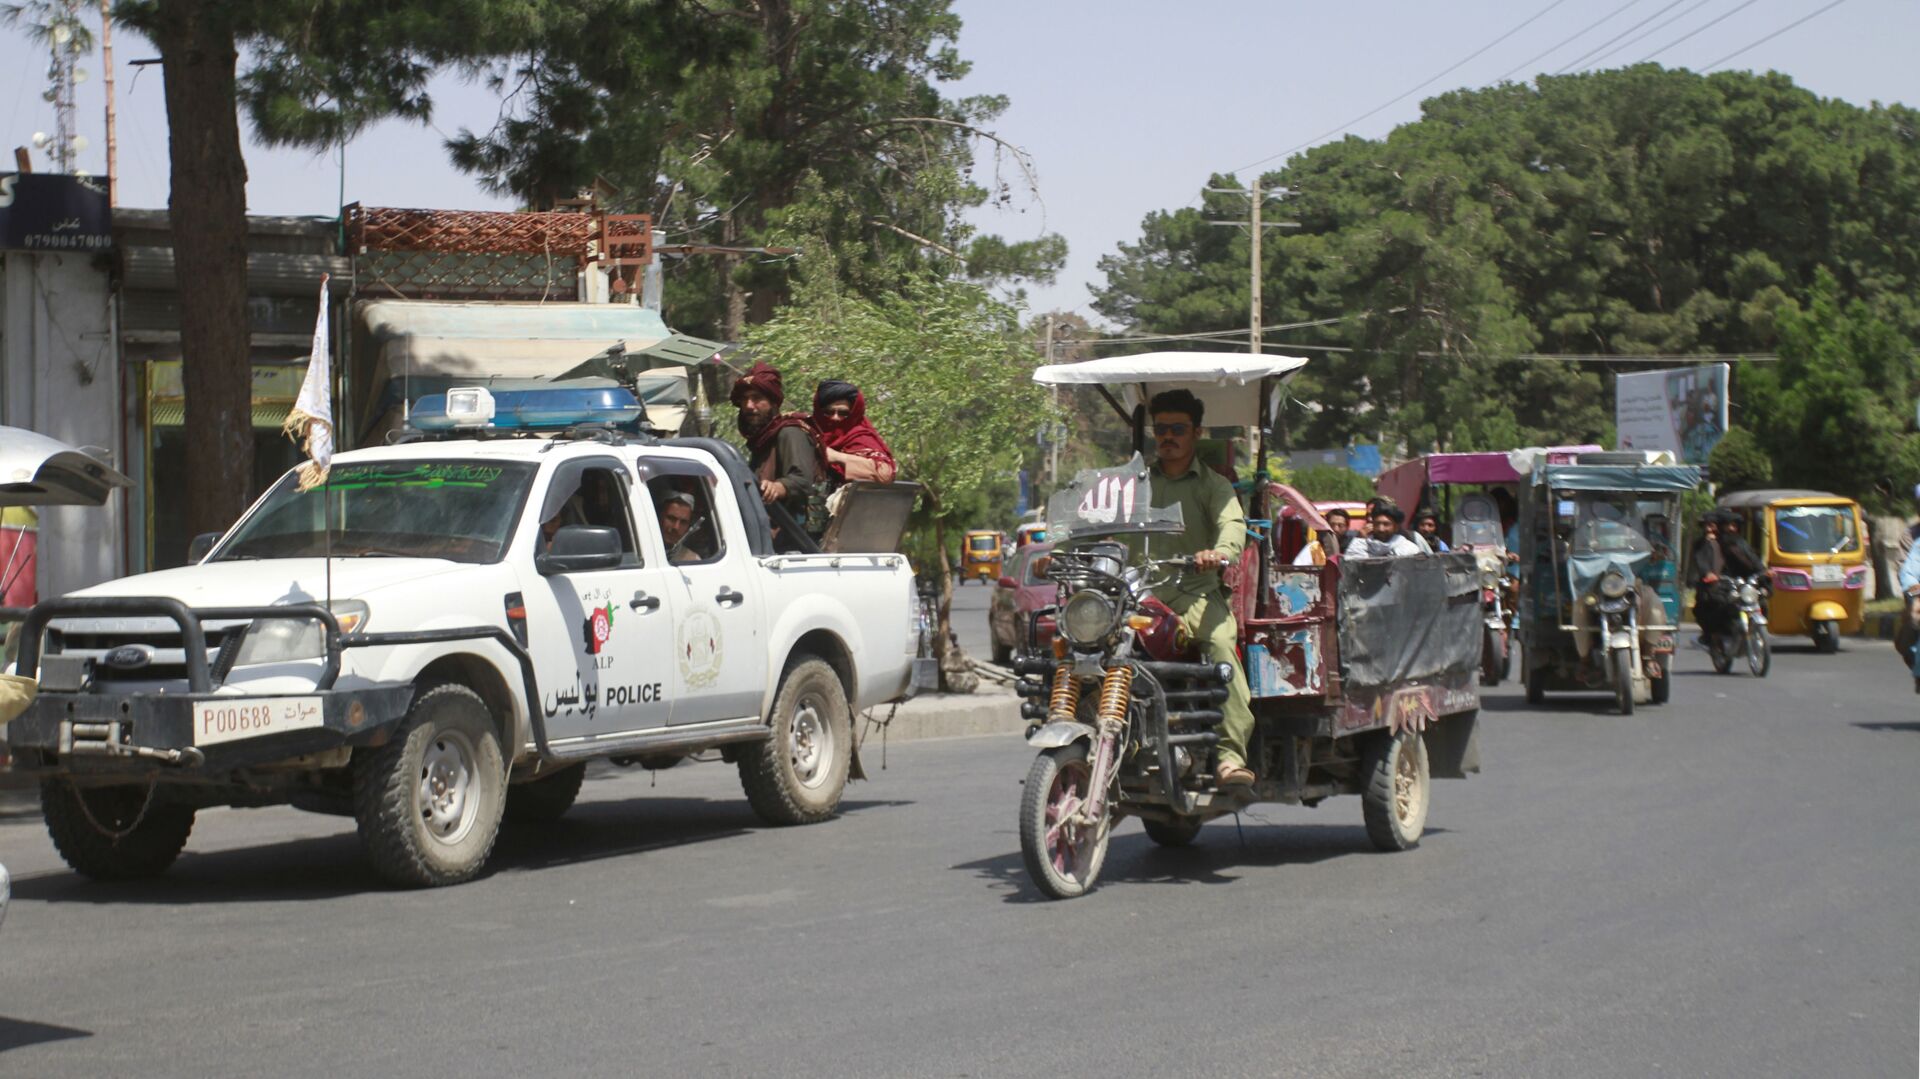 Members of the Taliban, left, drive with other motorists through city of Herat, Afghanistan, west of Kabul, Saturday, Aug. 14, 2021, after the province was taken from the Afghan government. (AP Photo/Hamed Sarfarazi) - Sputnik International, 1920, 07.09.2021